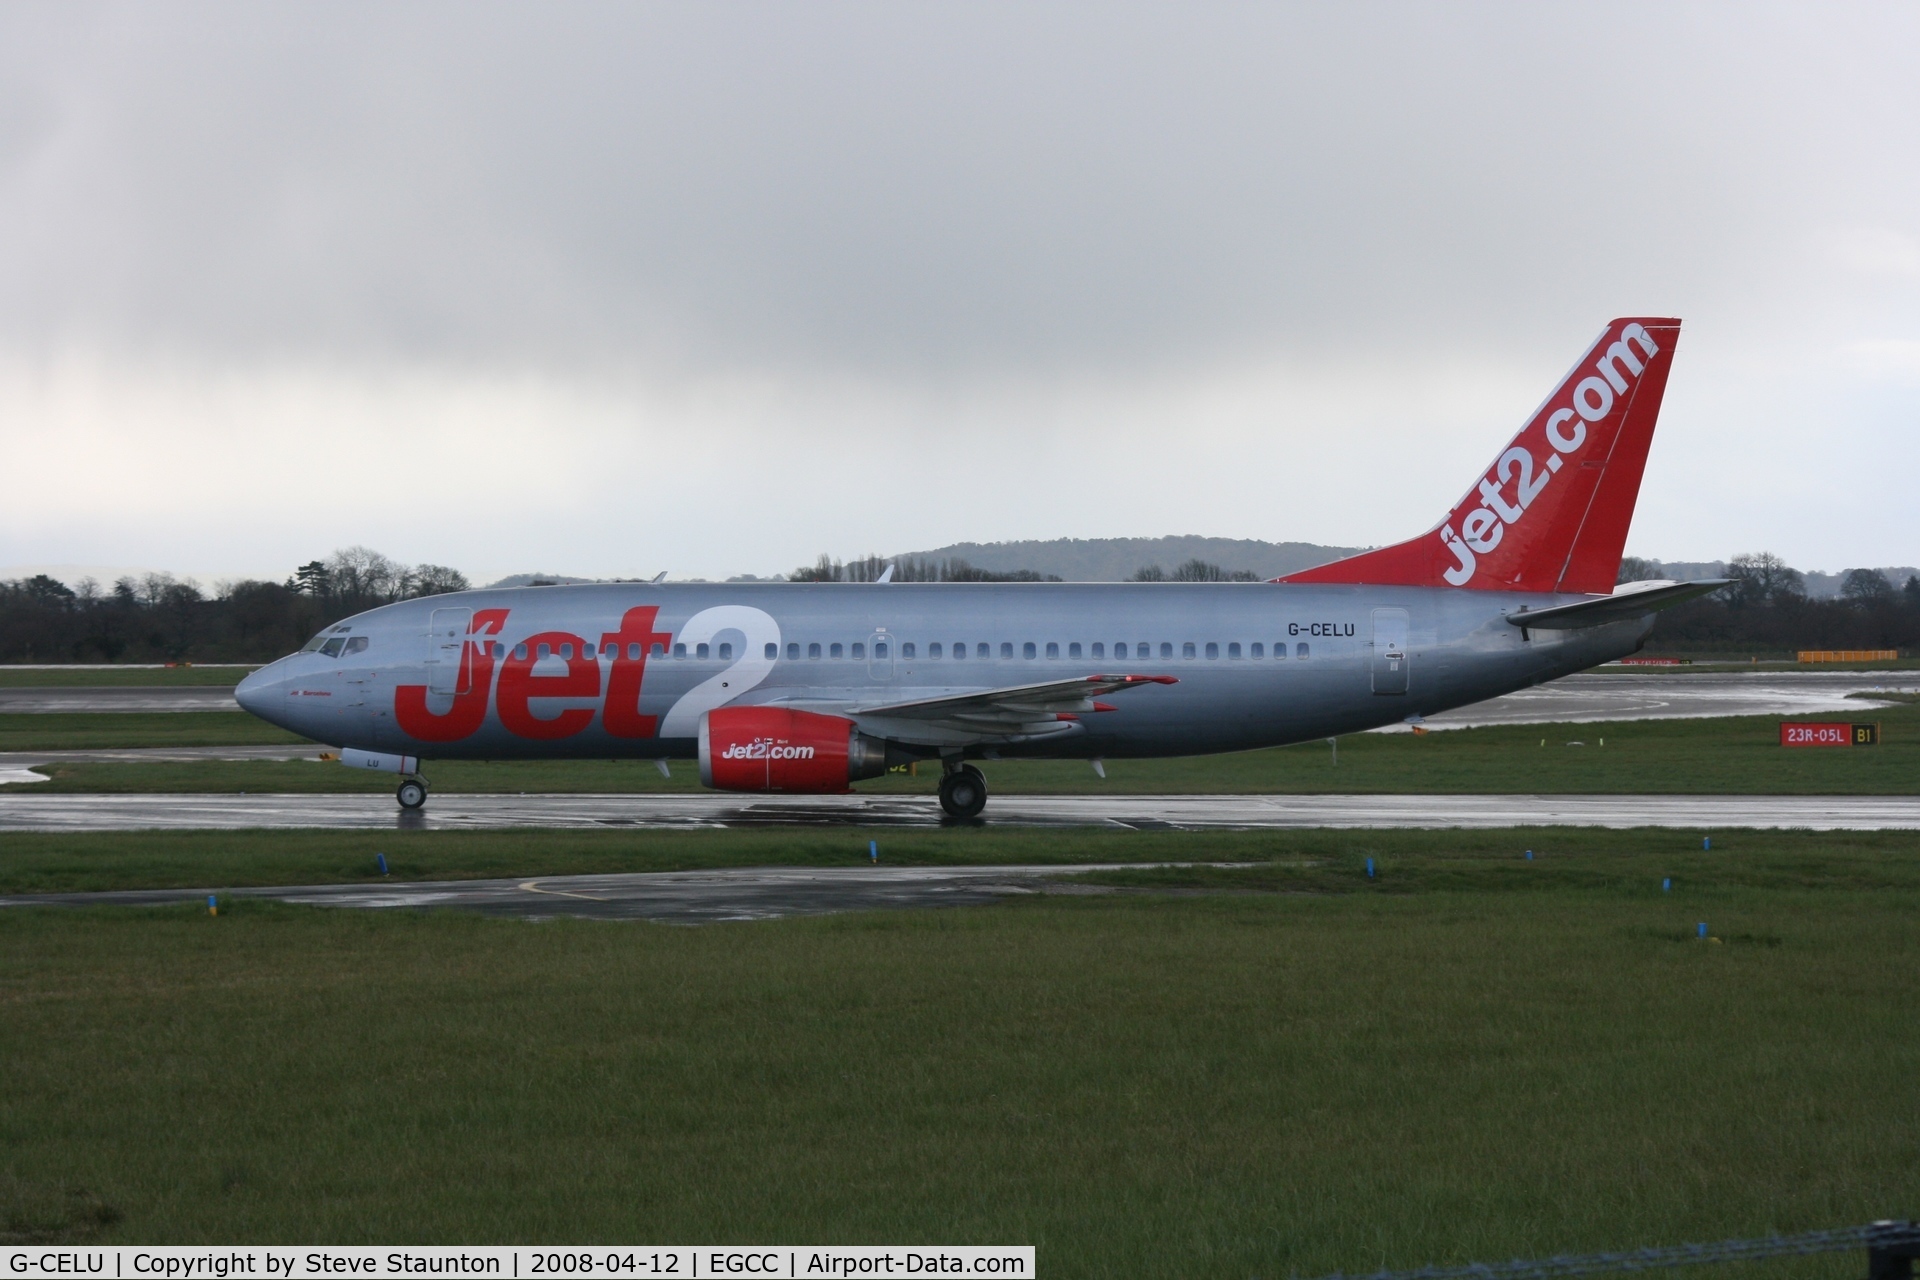 G-CELU, 1986 Boeing 737-377 C/N 23657, Taken at Manchester Airport on a typical showery April day